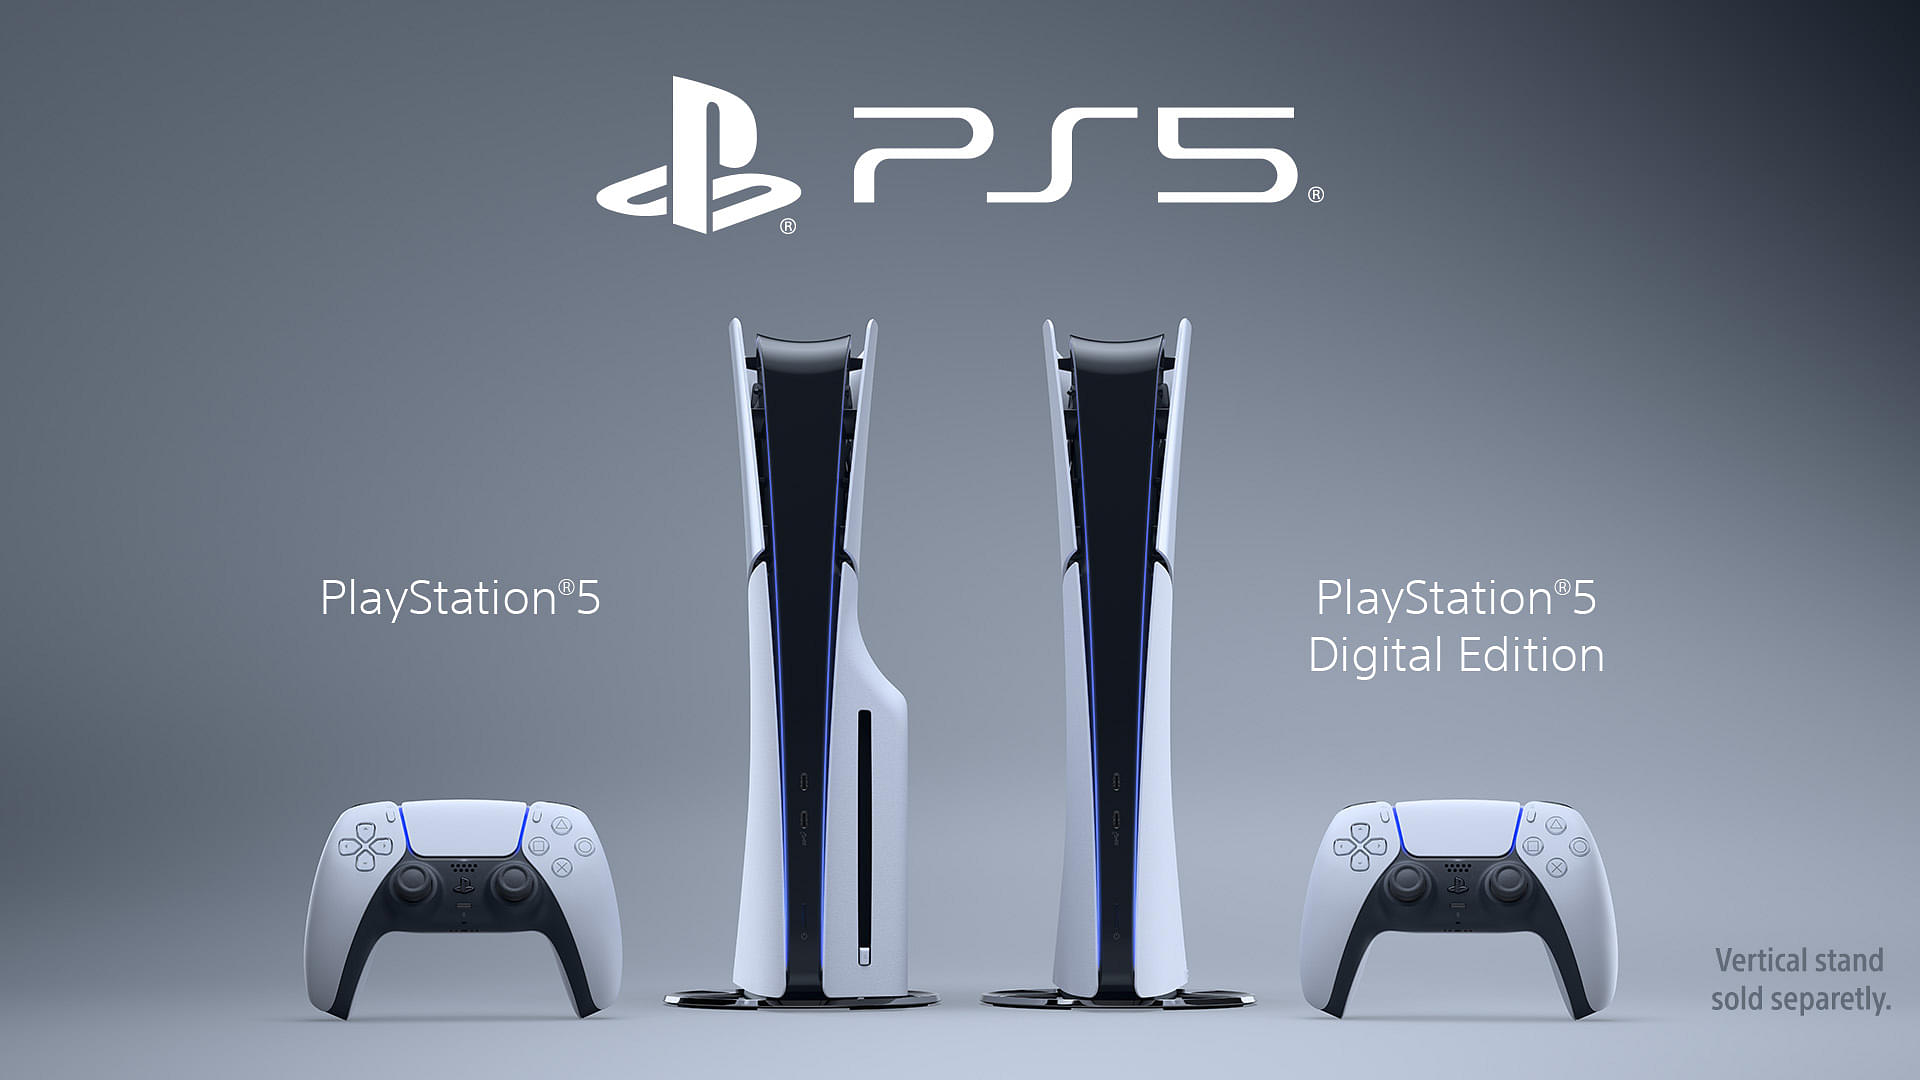 An image showing new PlayStation console from Sony